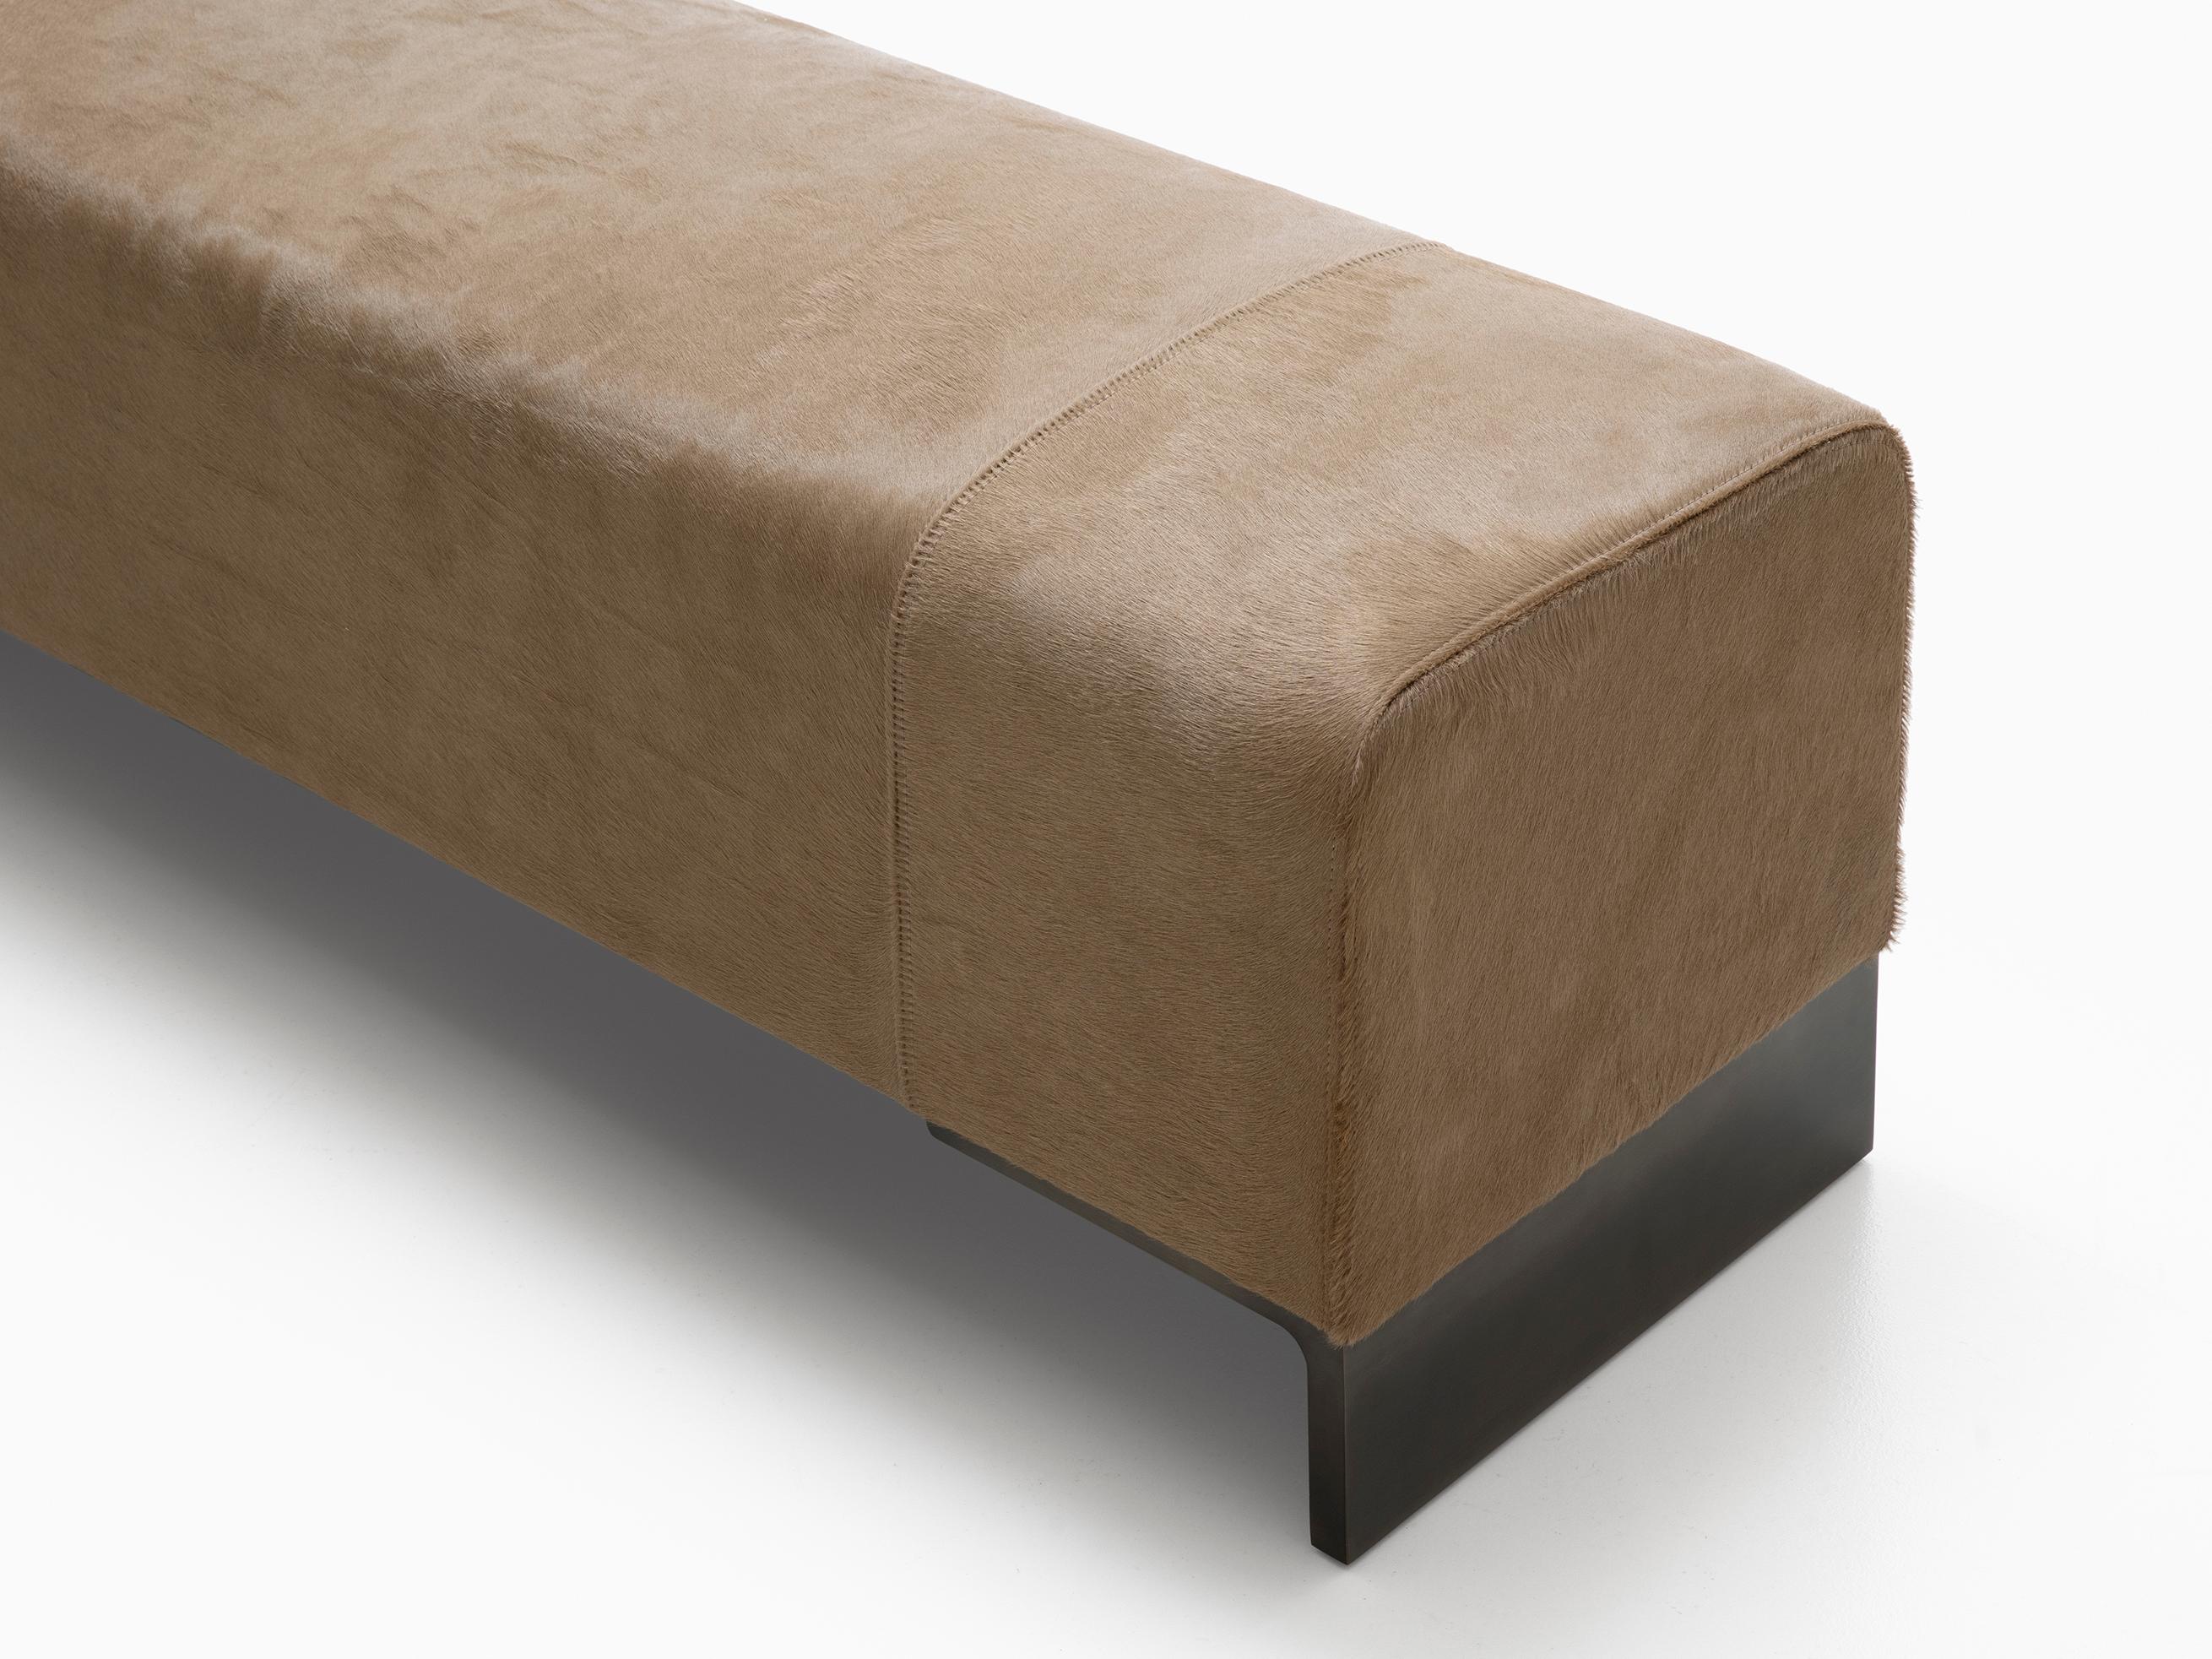 HOLLY HUNT Arakan bench in linden bronze finish with leather upholstery. A voluminous bench that brings gravity and softness to any room, ideal at the foot of the bed. Beautiful and modern with a gorgeous brushed metal base. Upholstered in our